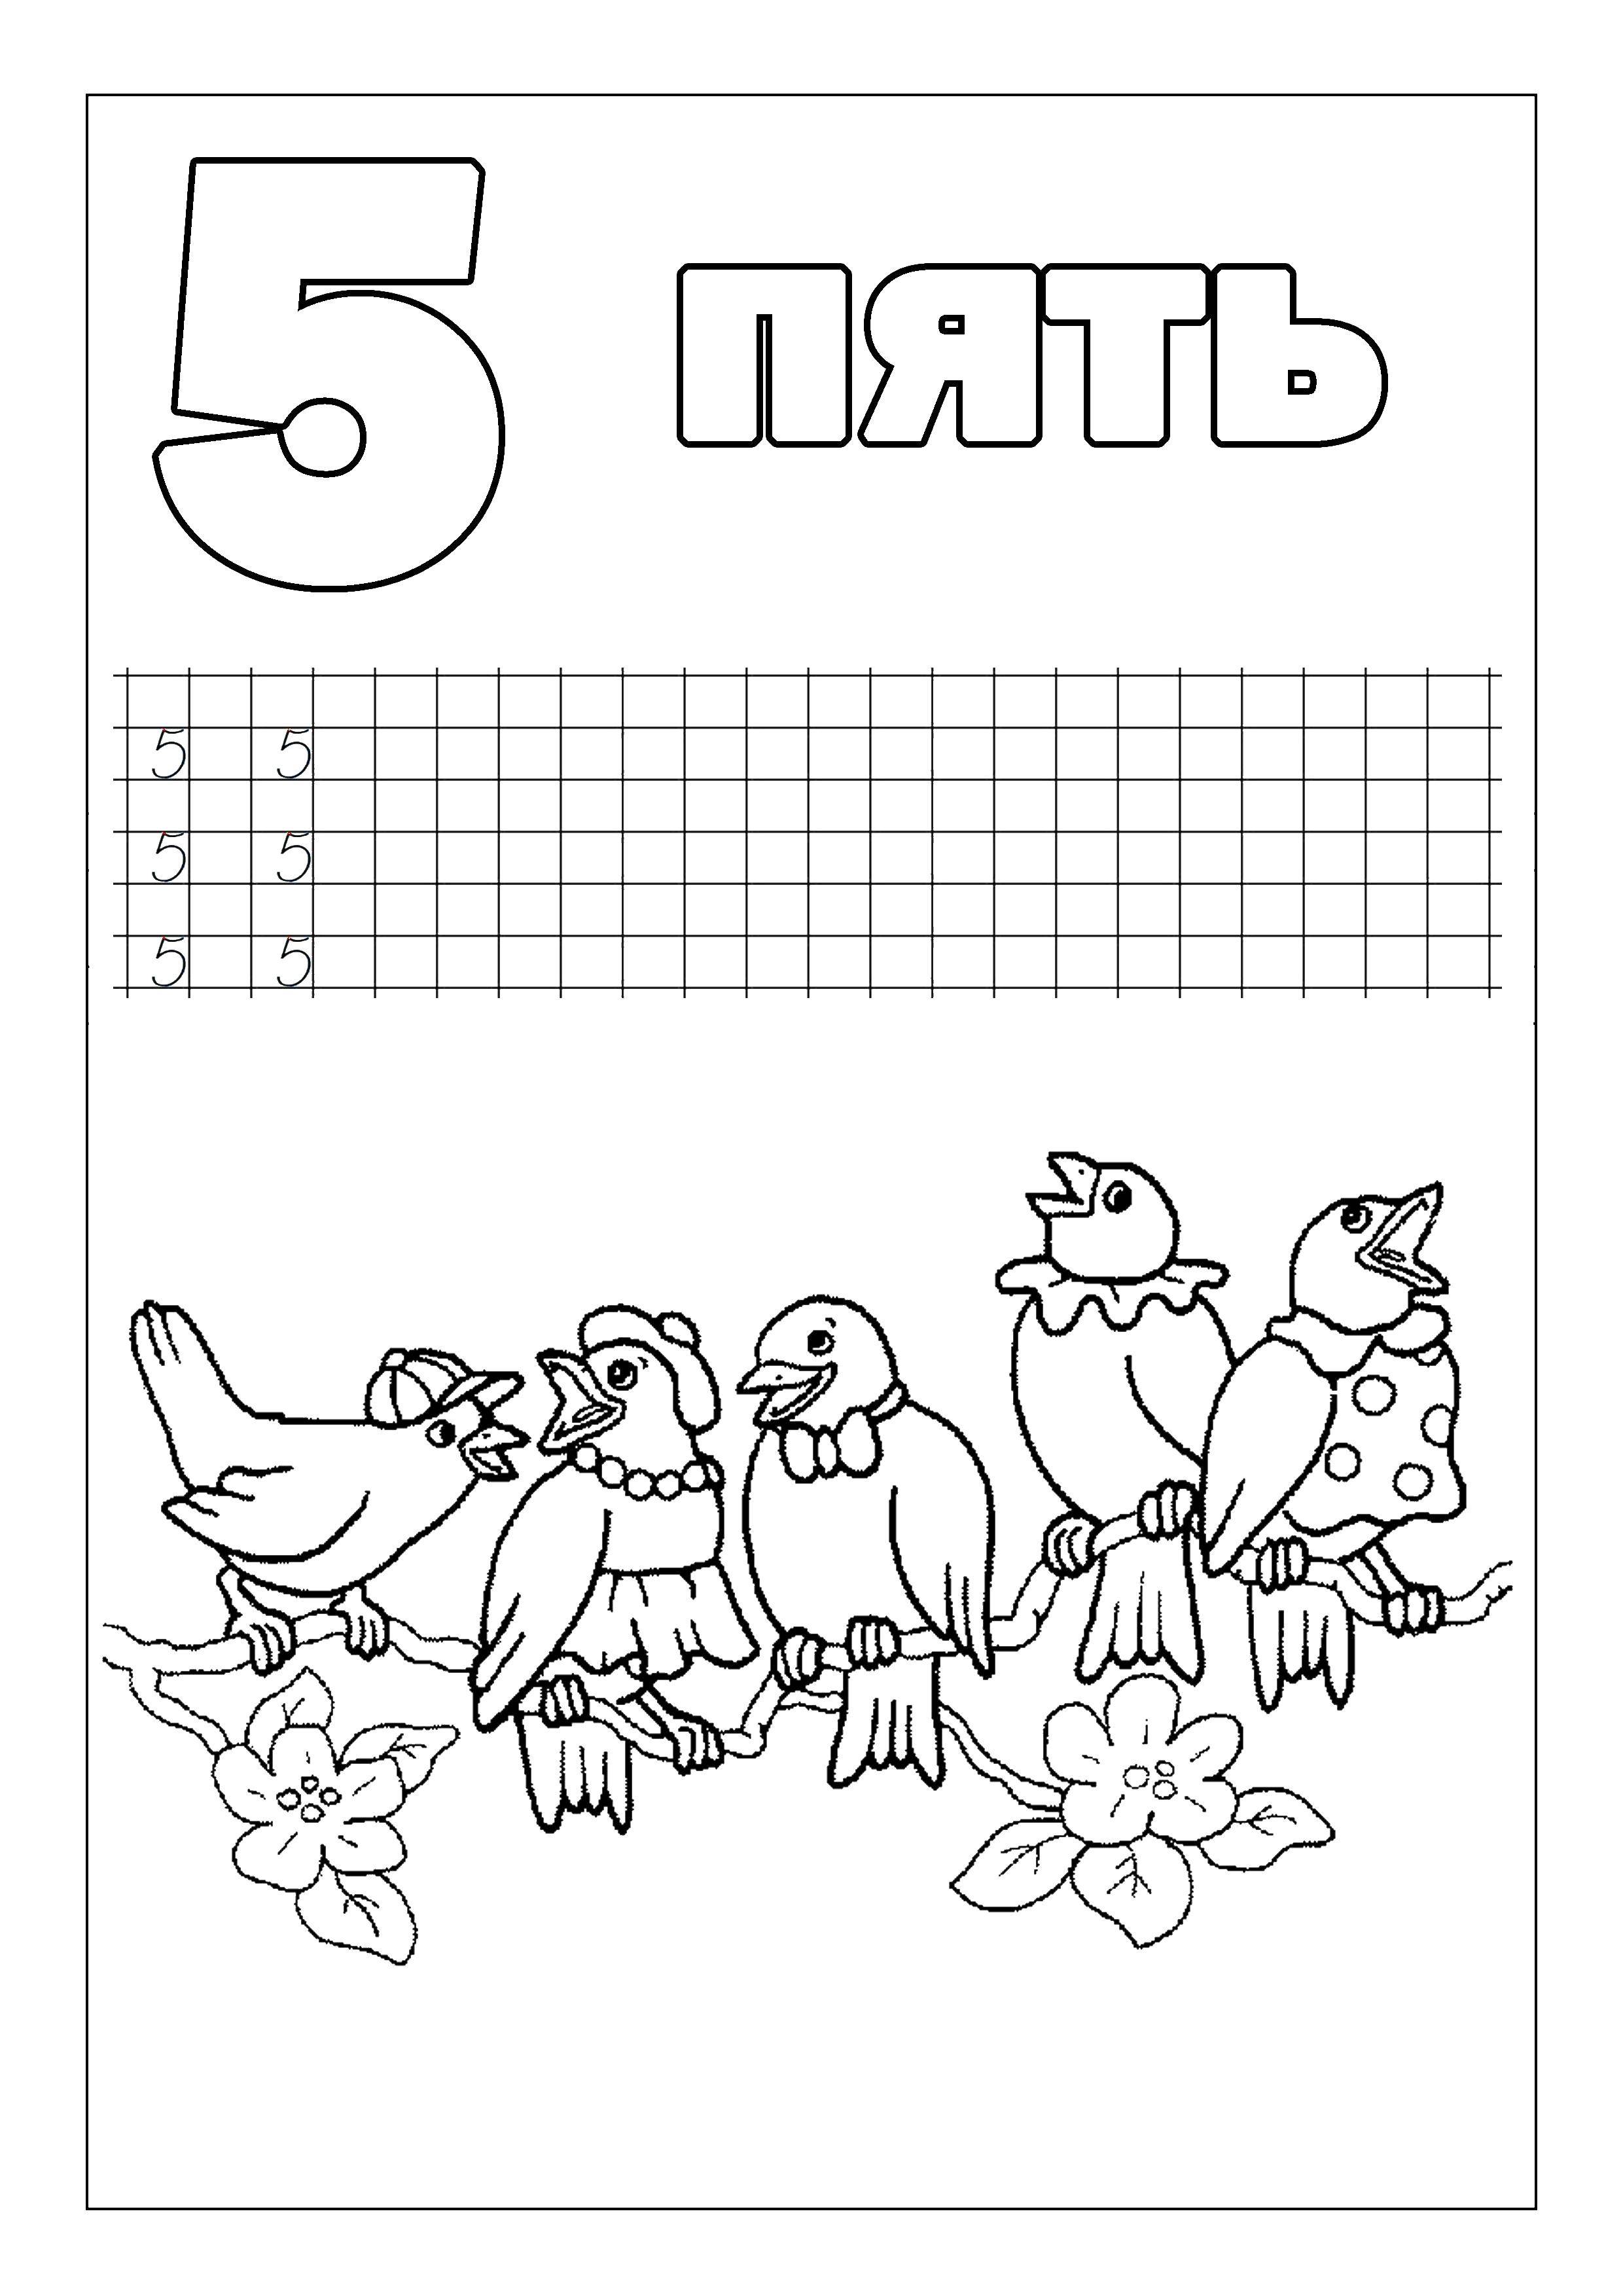 Coloring Recipe number 5. Category tracing numbers. Tags:  the recipe, 5, figure, birds.